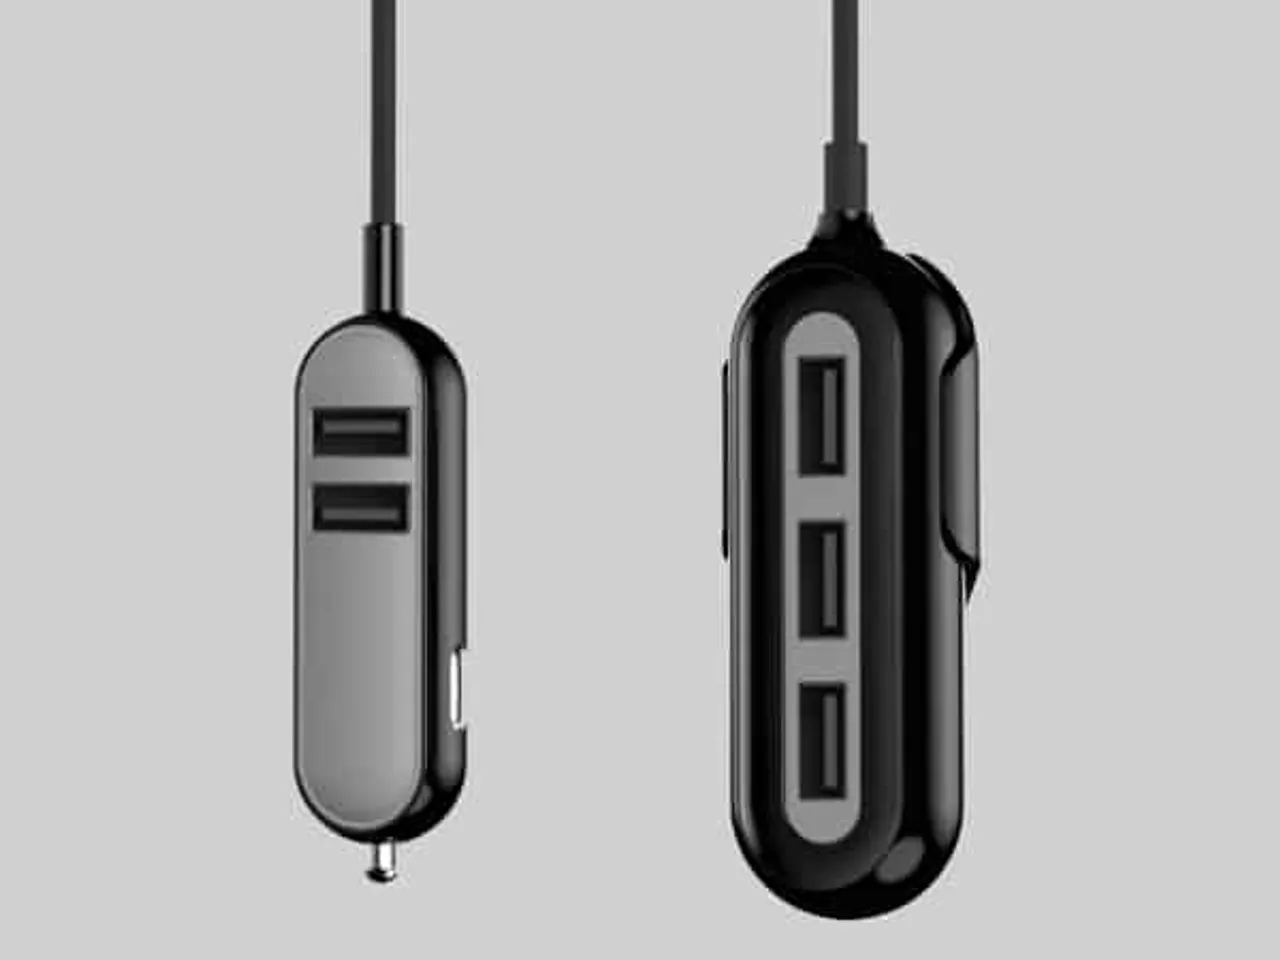 Portronics Launches 5 Port Car-Charger “Car Power IV”